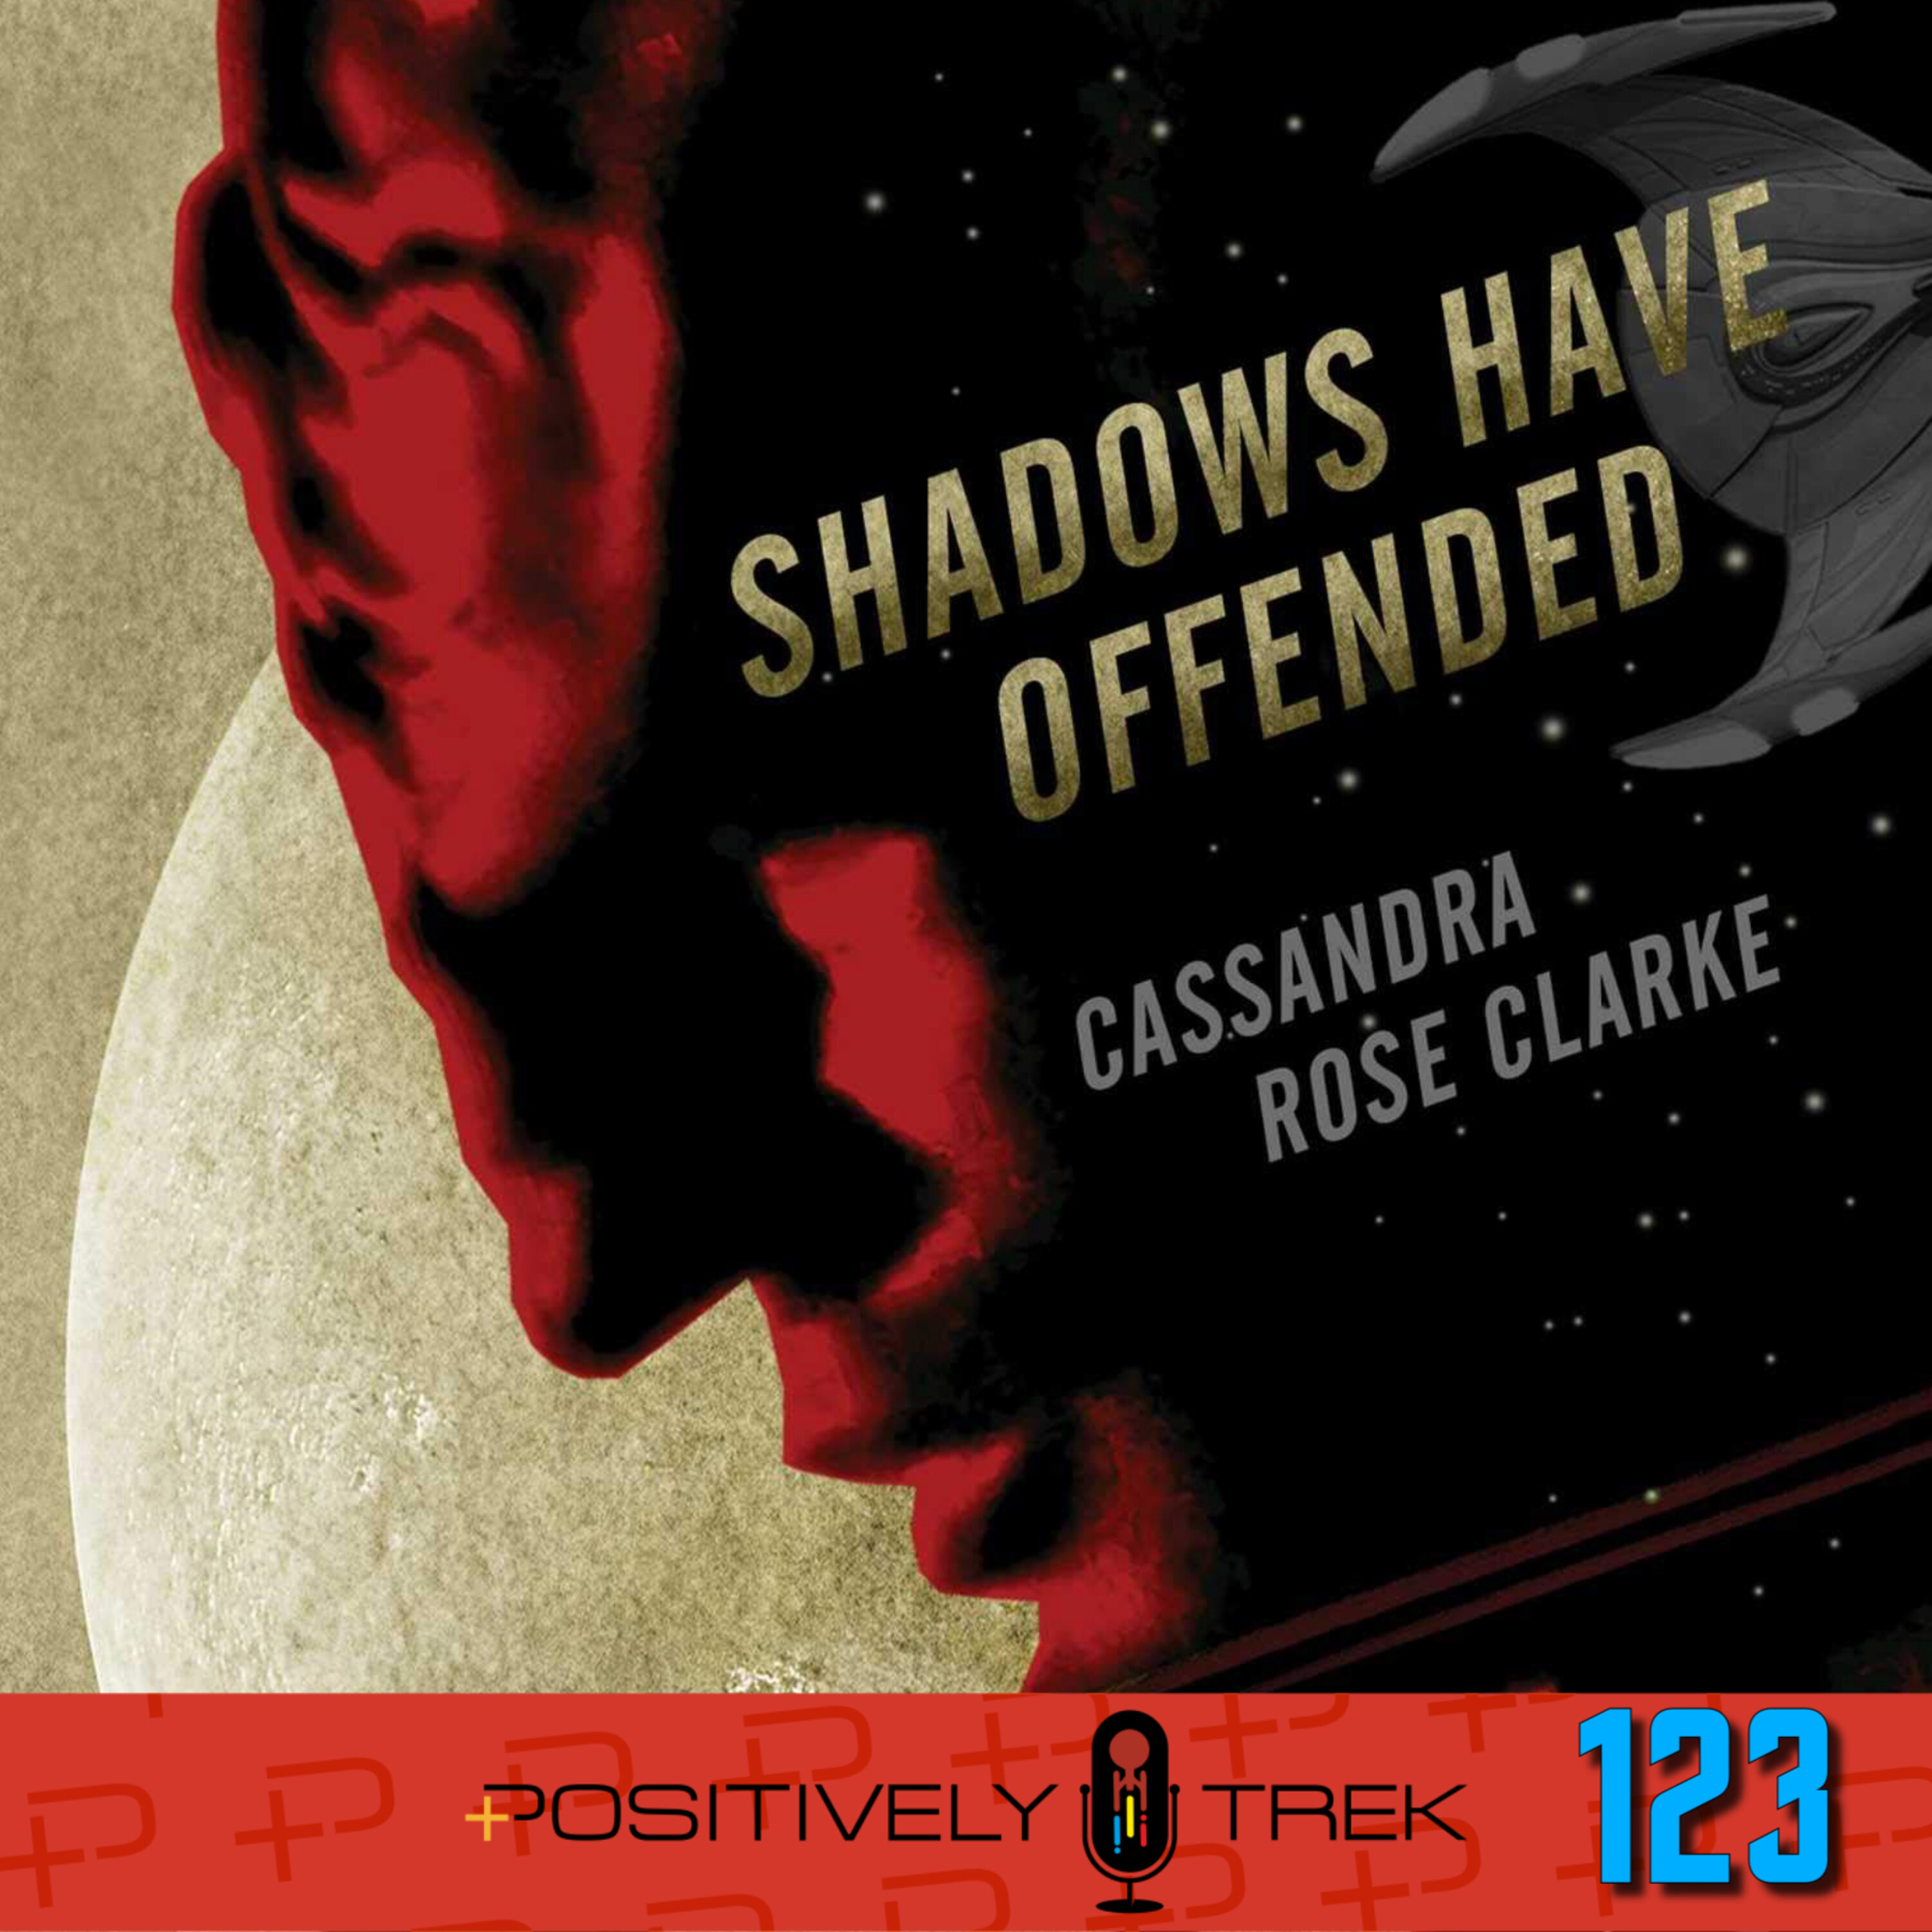 Book Club: Shadows Have Offended Image